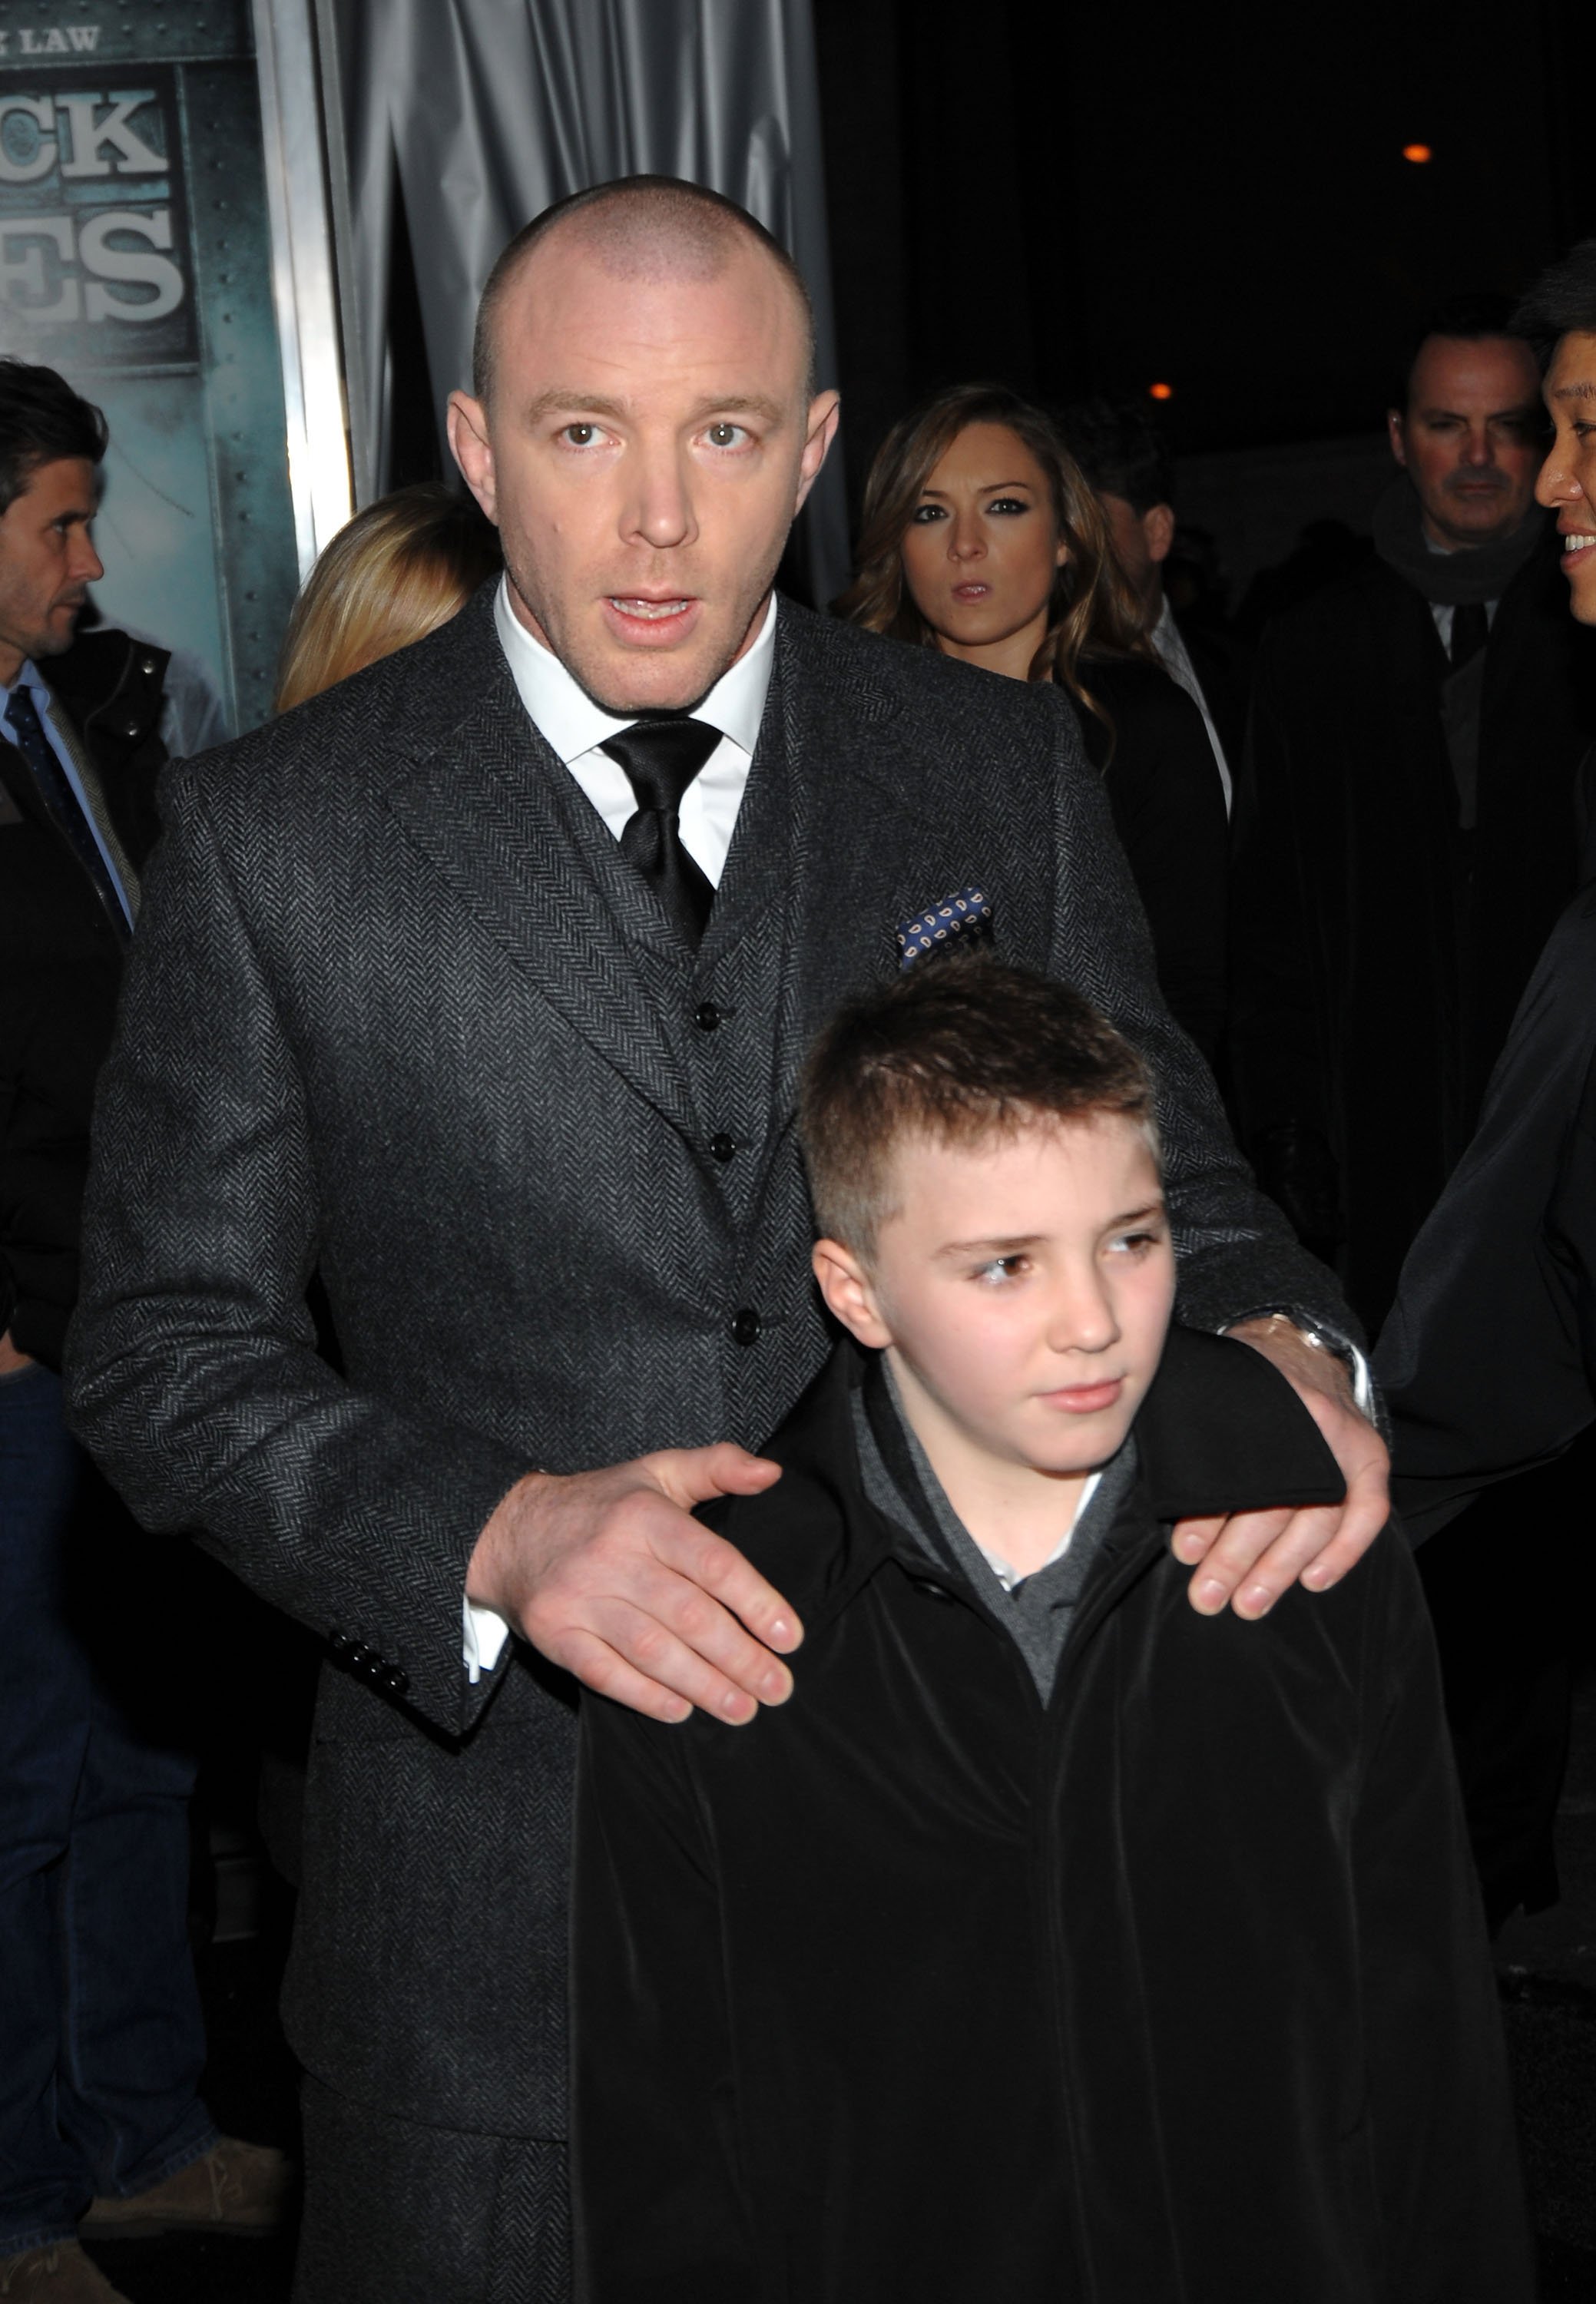 Rocco Ritchie and his father Guy Ritchie attend the premiere of "Sherlock Holmes" at the Lincoln Center on December 17, 2009 in New York City | Source: Getty Images